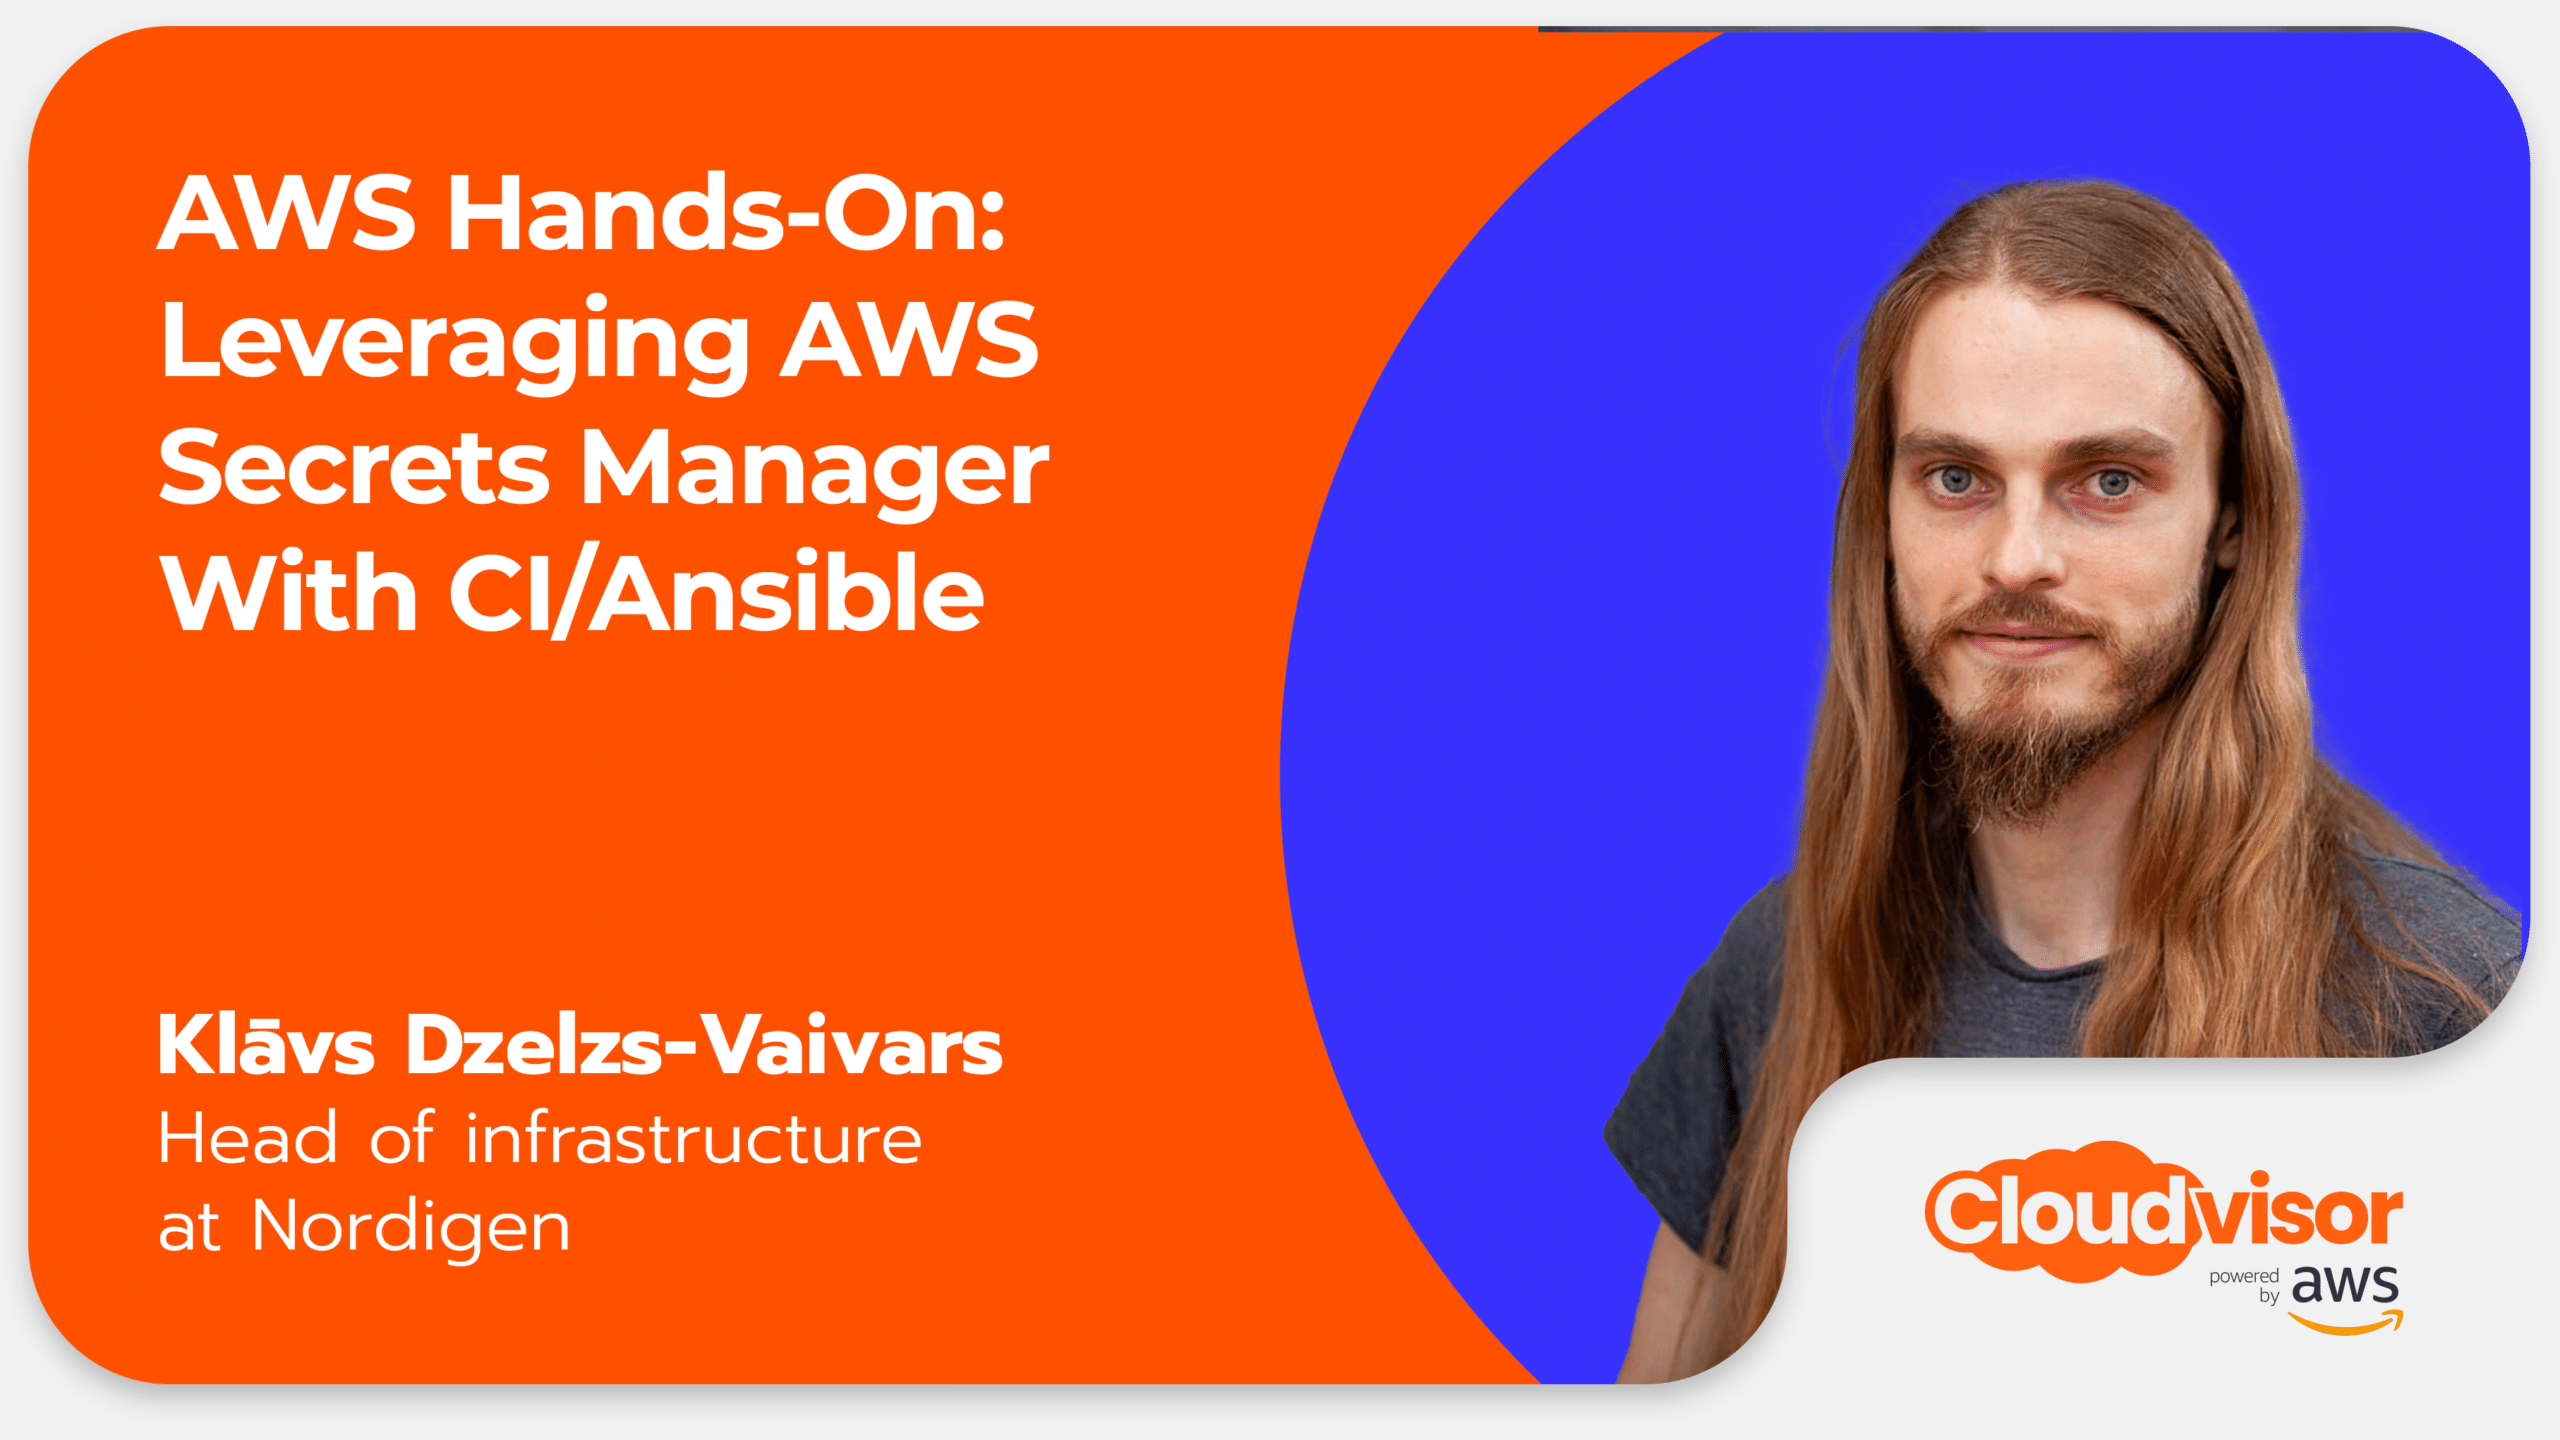 AWS Hands-On: Leveraging AWS Secrets Manager With CI/Ansible